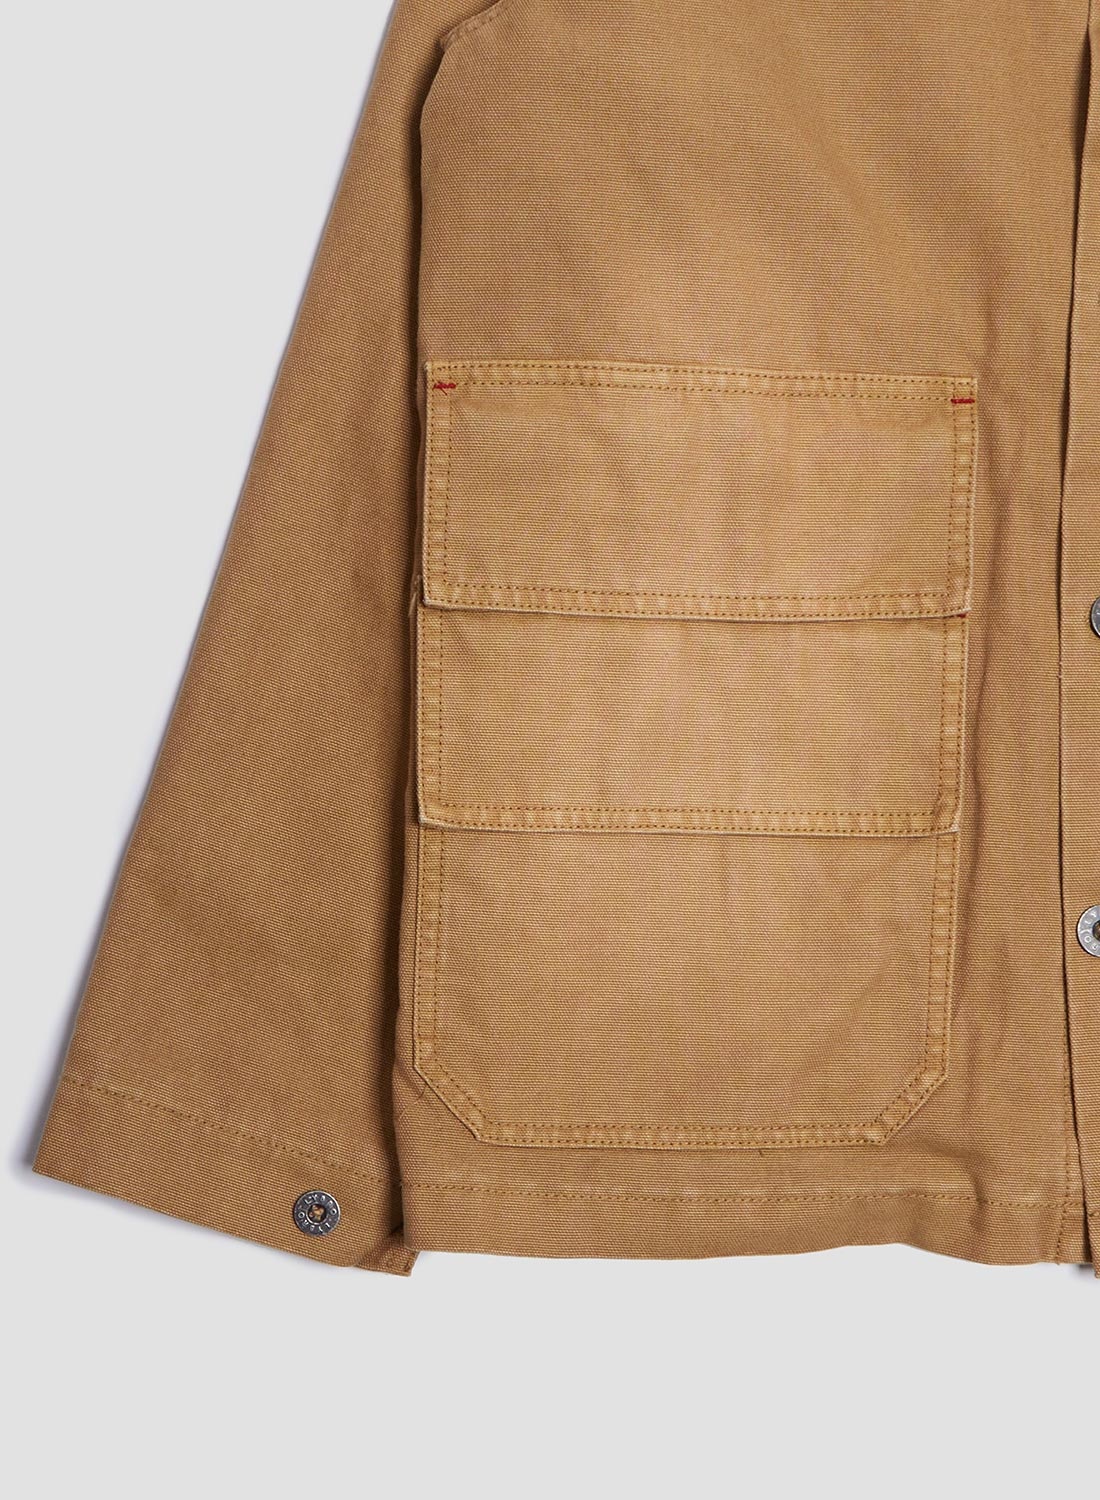 Hunting Chore Jacket Canvas in Tan - 7